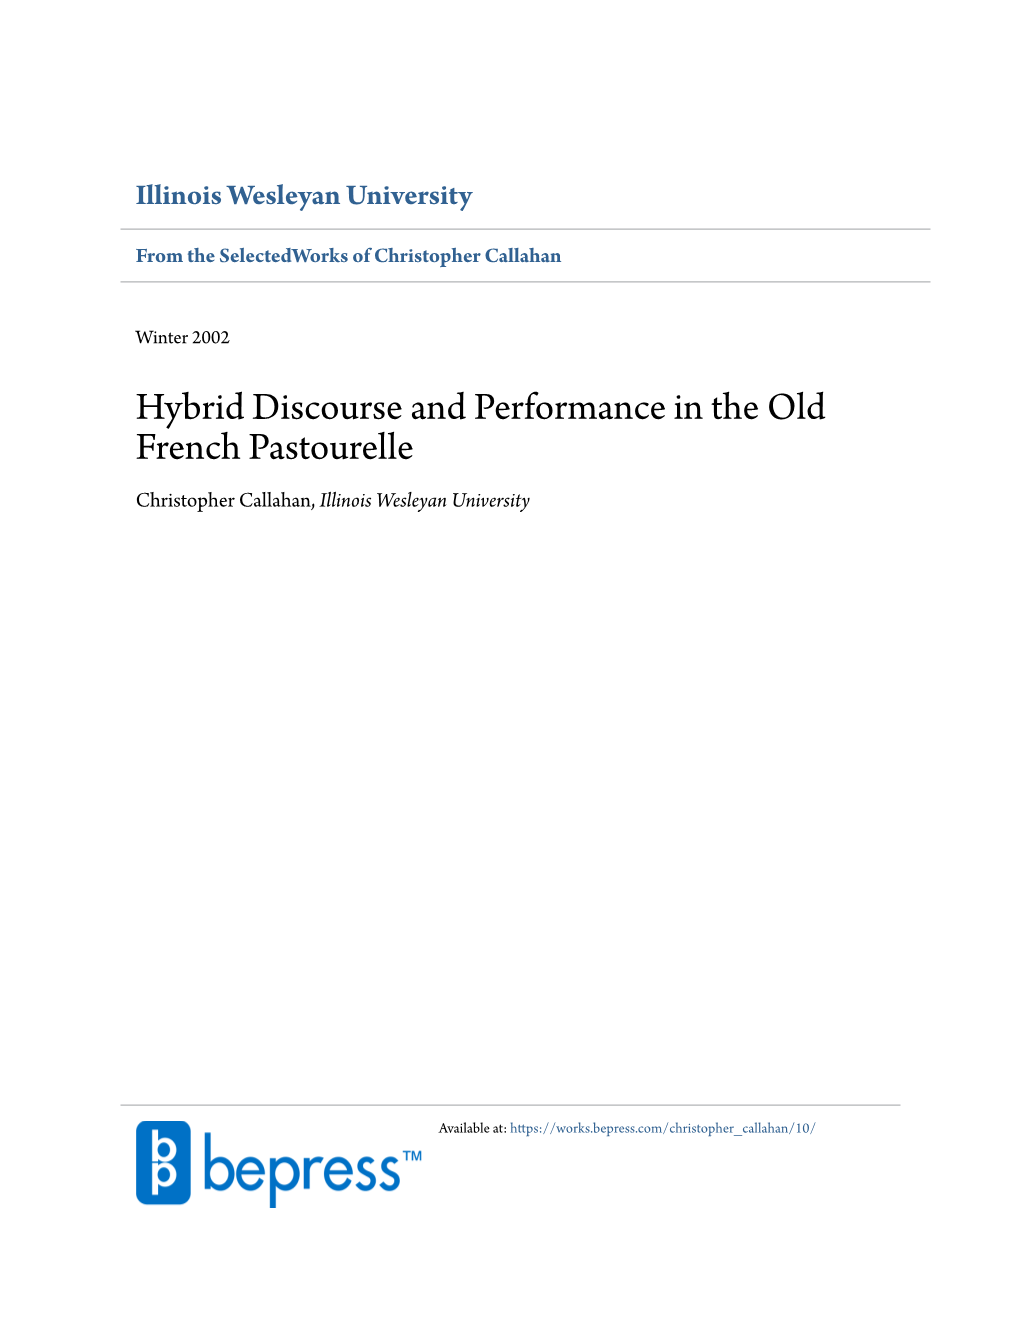 Hybrid Discourse and Performance in the Old French Pastourelle Christopher Callahan, Illinois Wesleyan University